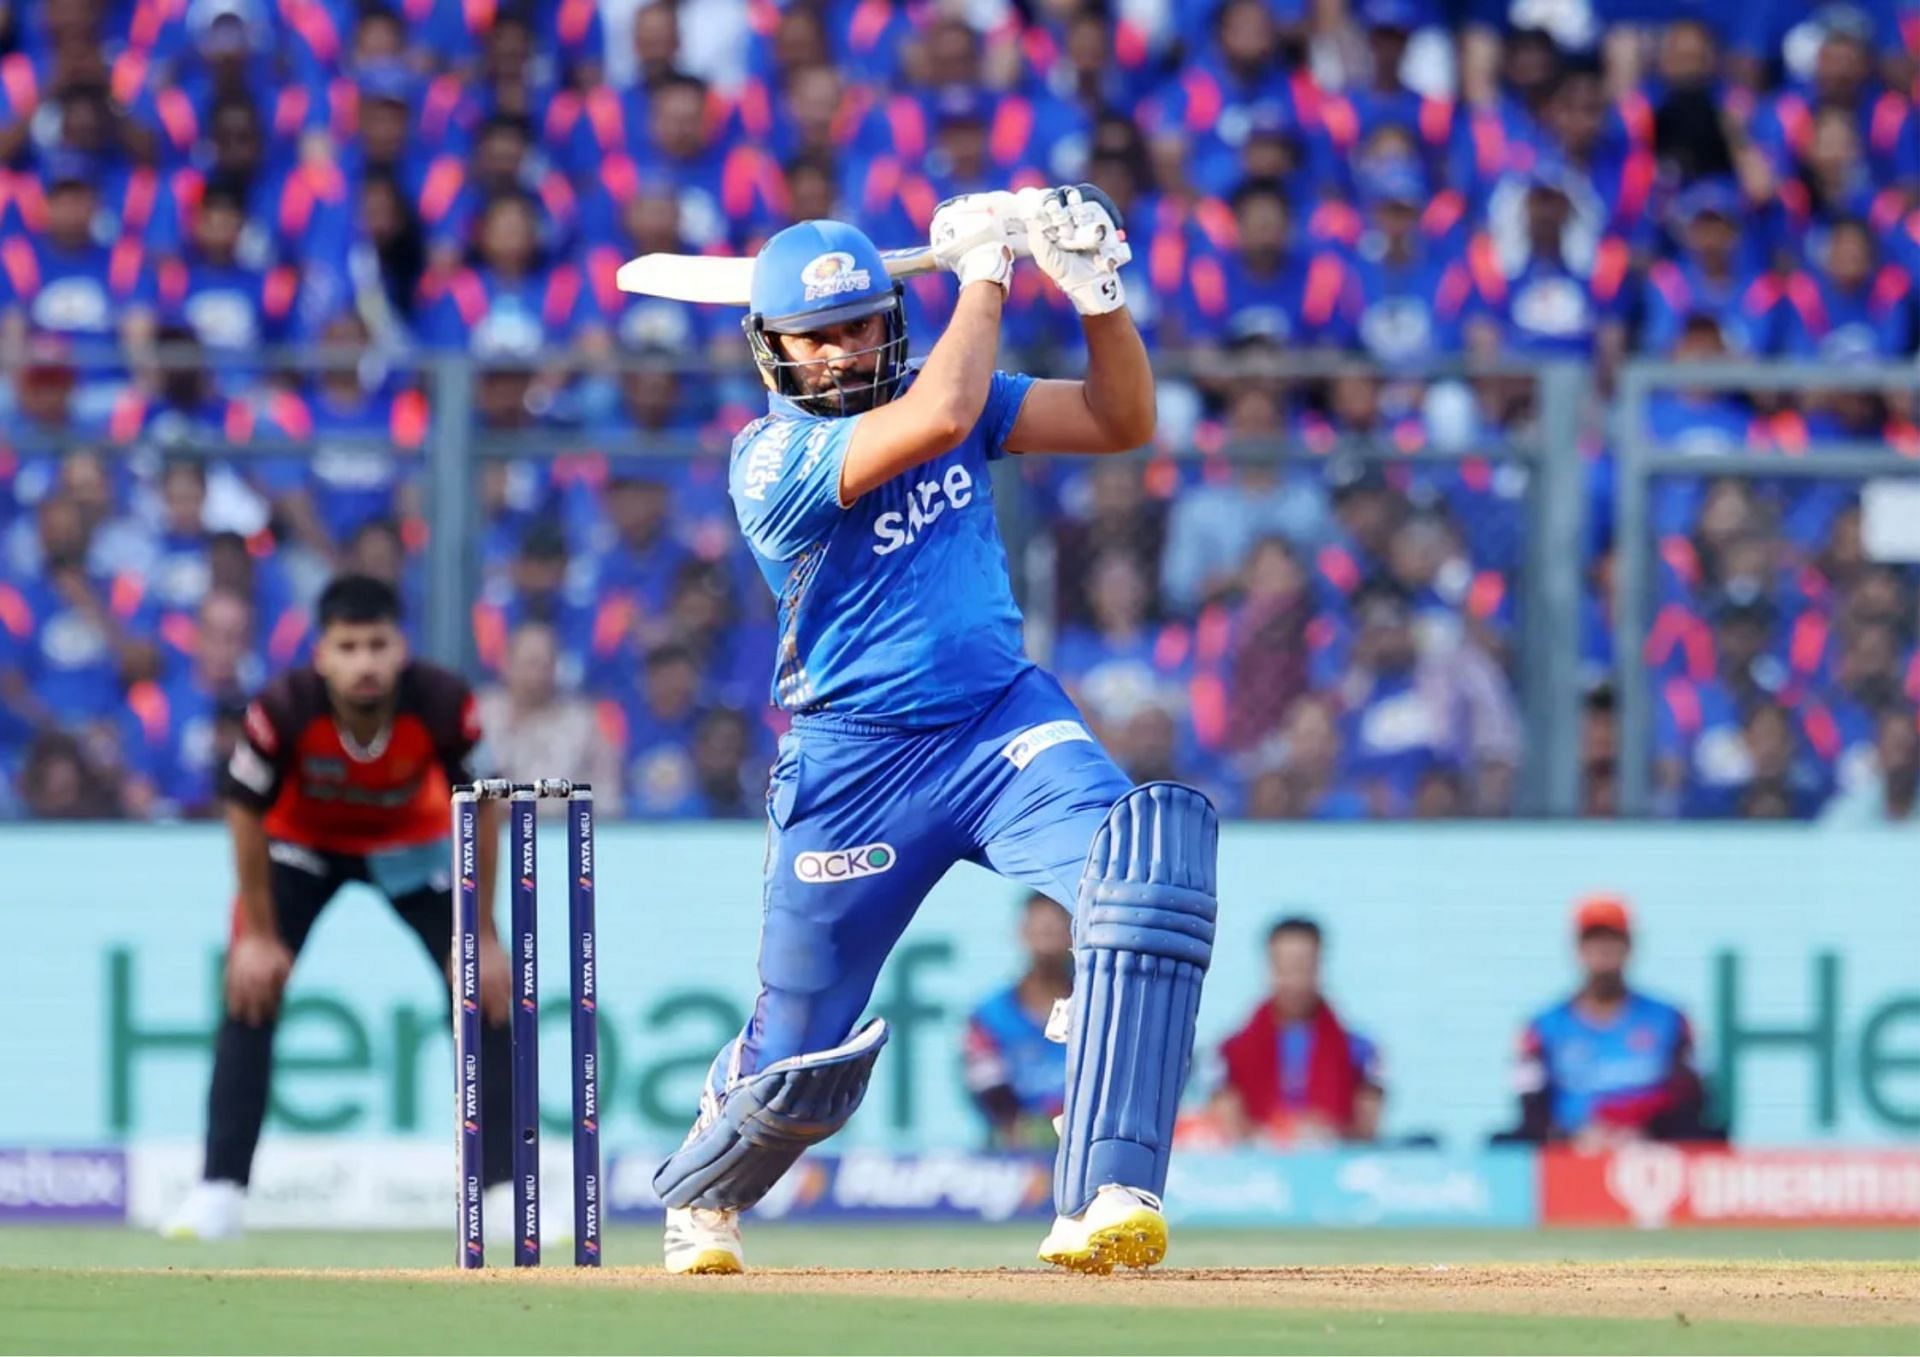 Rohit Sharma will be looking to lead MI to their sixth IPL title having qualified for the playoffs of the 2023 season (Picture Credits: BCCI).